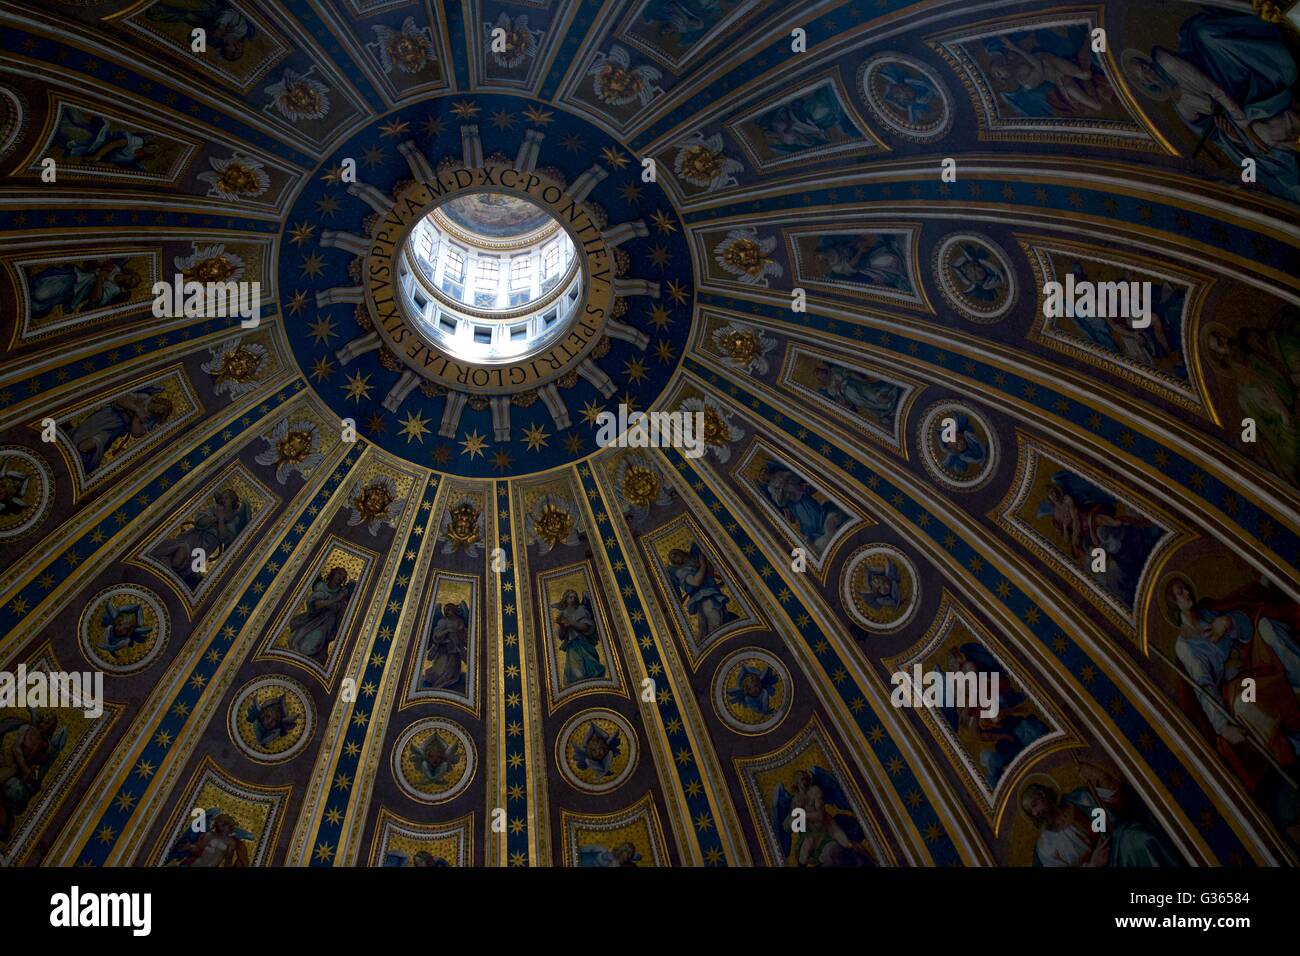 Interior view of dome of St Peter's Cathedral, by Michelangelo, Vatican, Rome, Italy, Europe Stock Photo